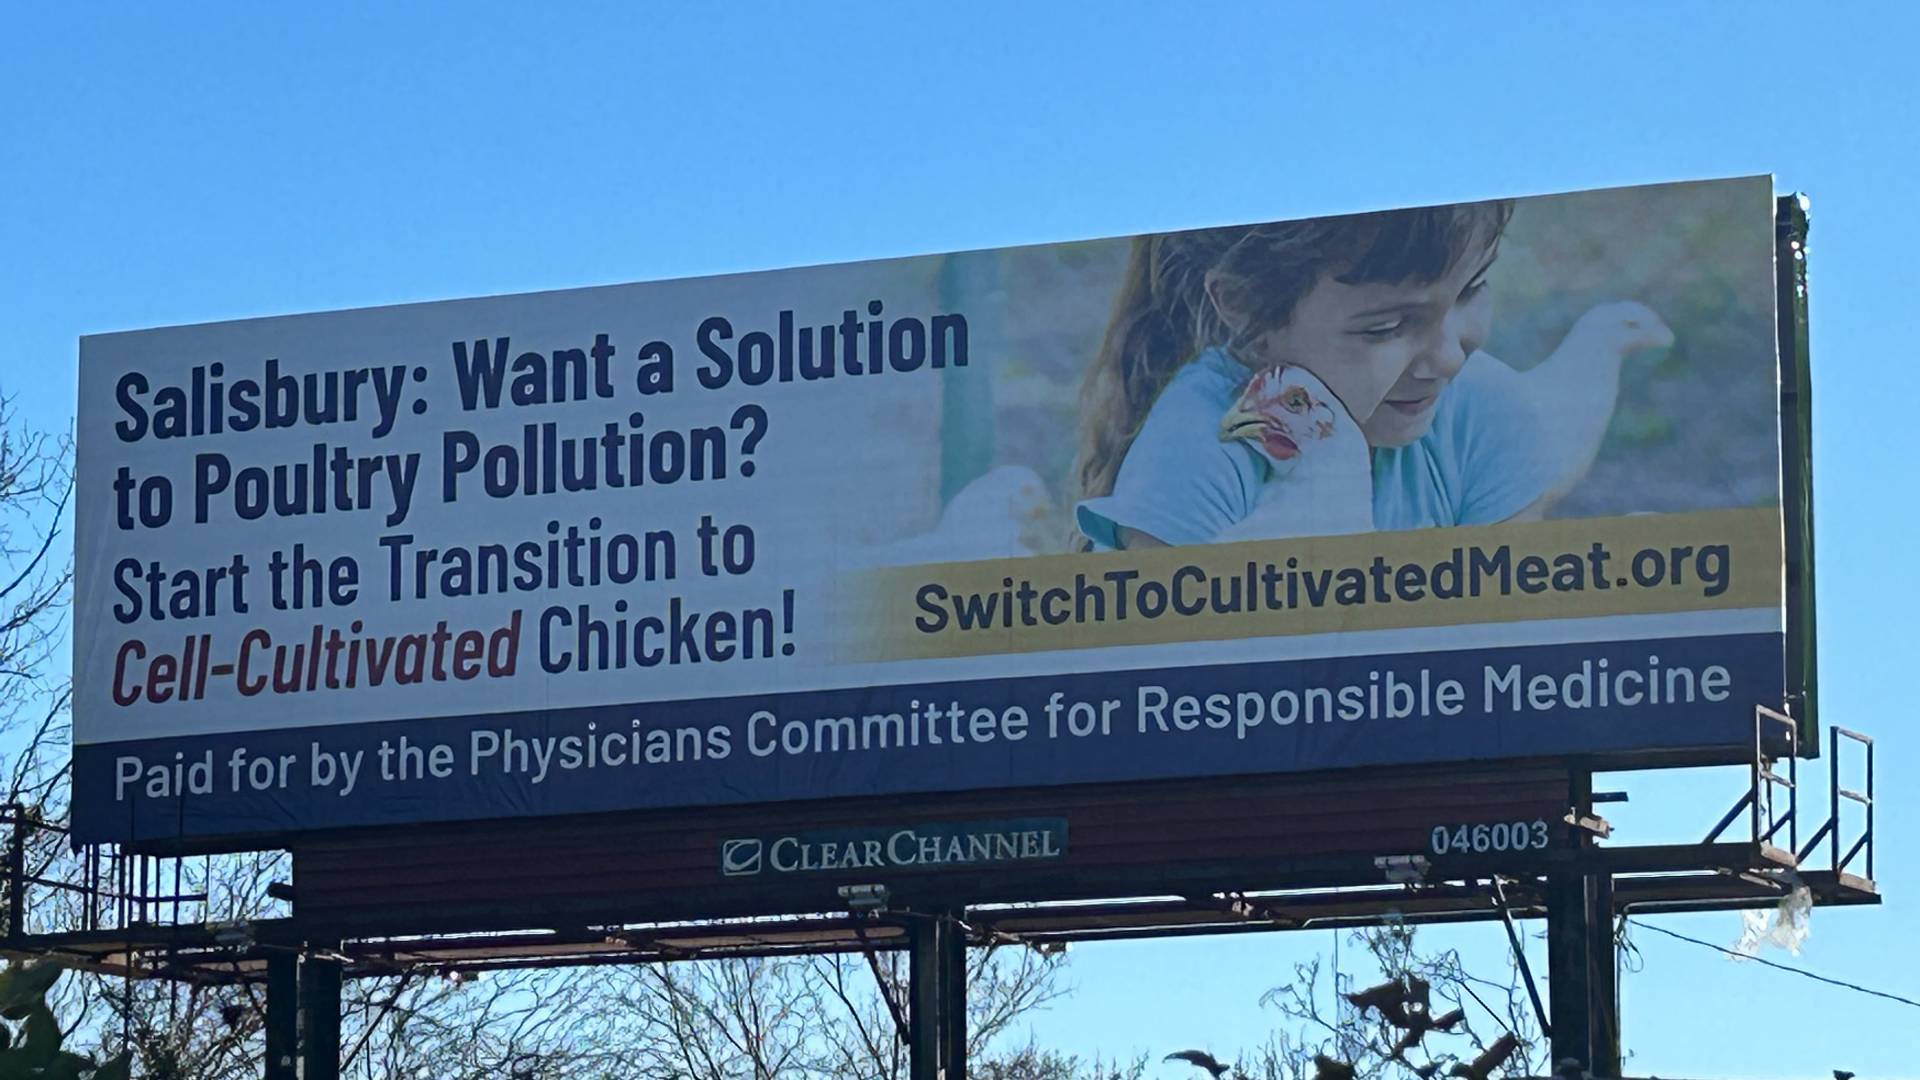 Billboards in Top Poultry Producing Region Urge  Transition to Cell-Cultivated Chicken to Curb Bay Pollution